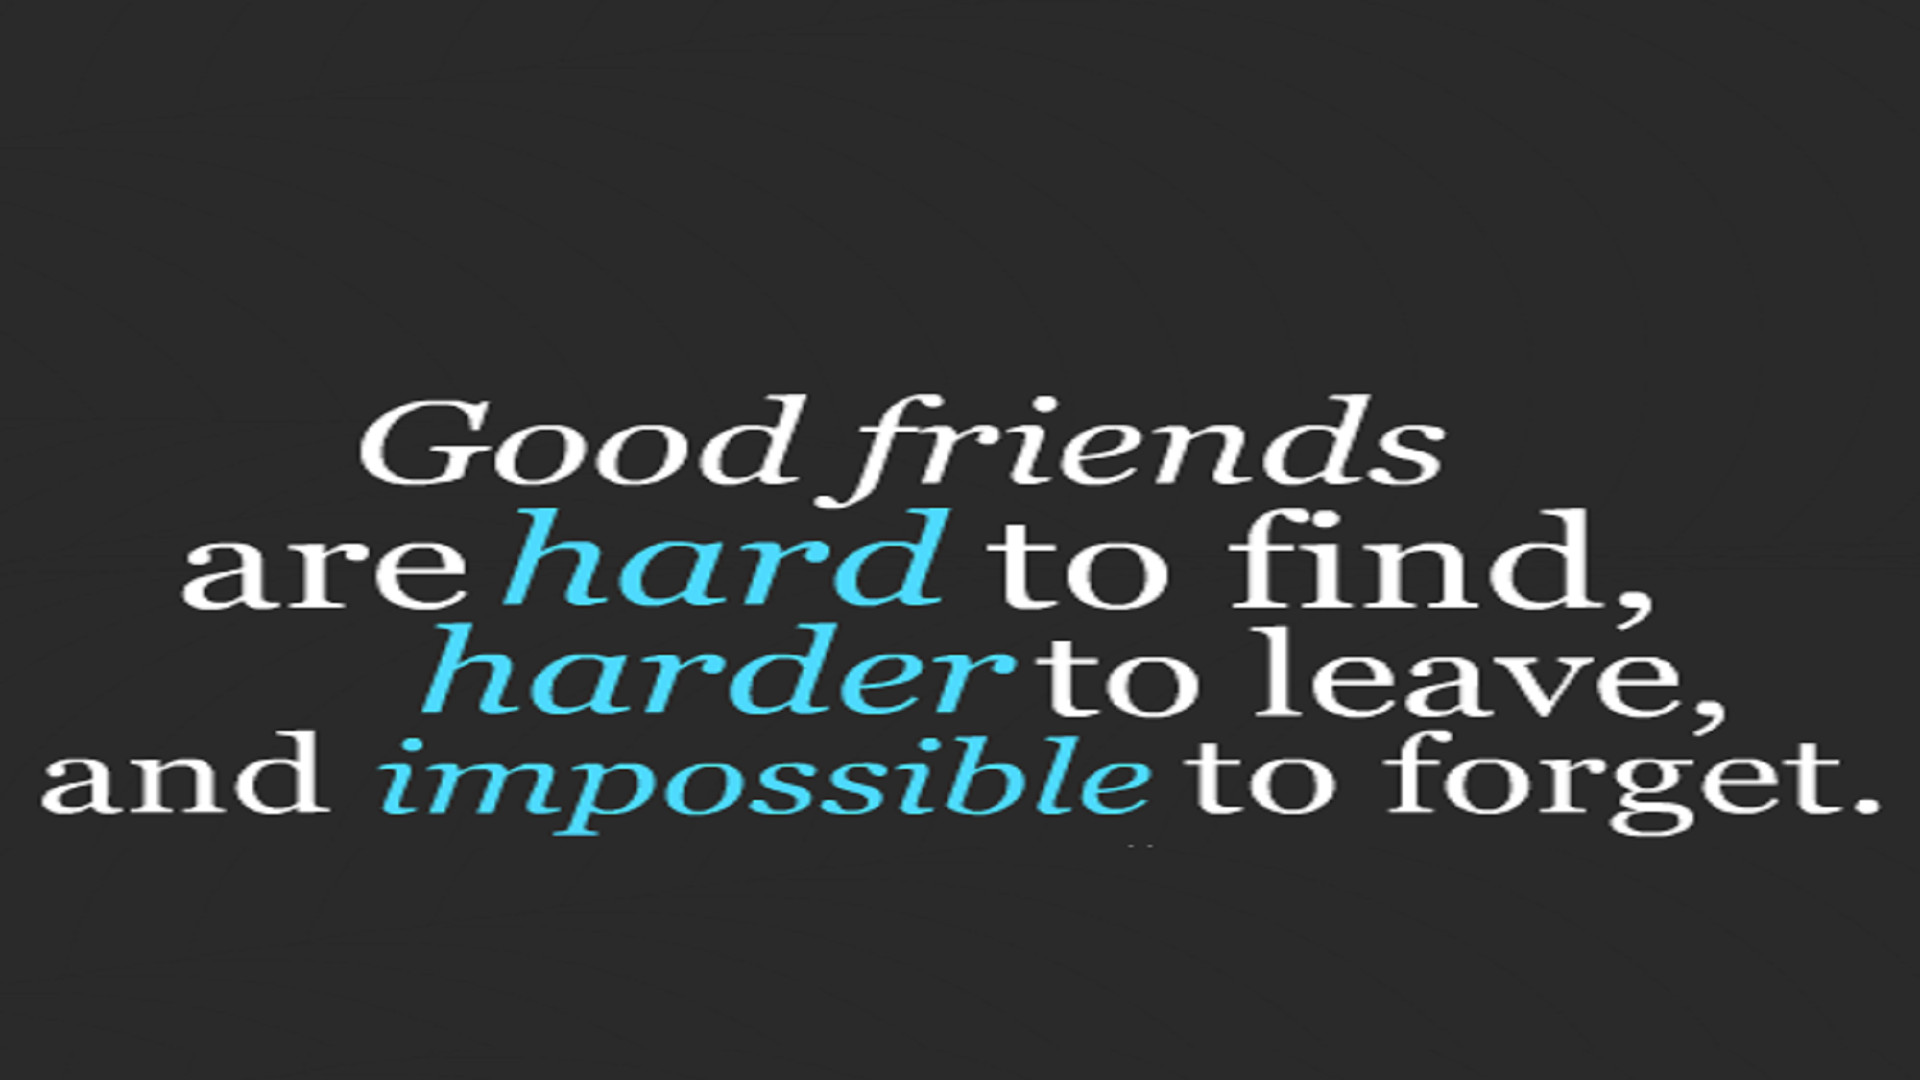 Friendship Quotes Picture
 Quotes About Friendship free hd wallpapers HD Wallpaper